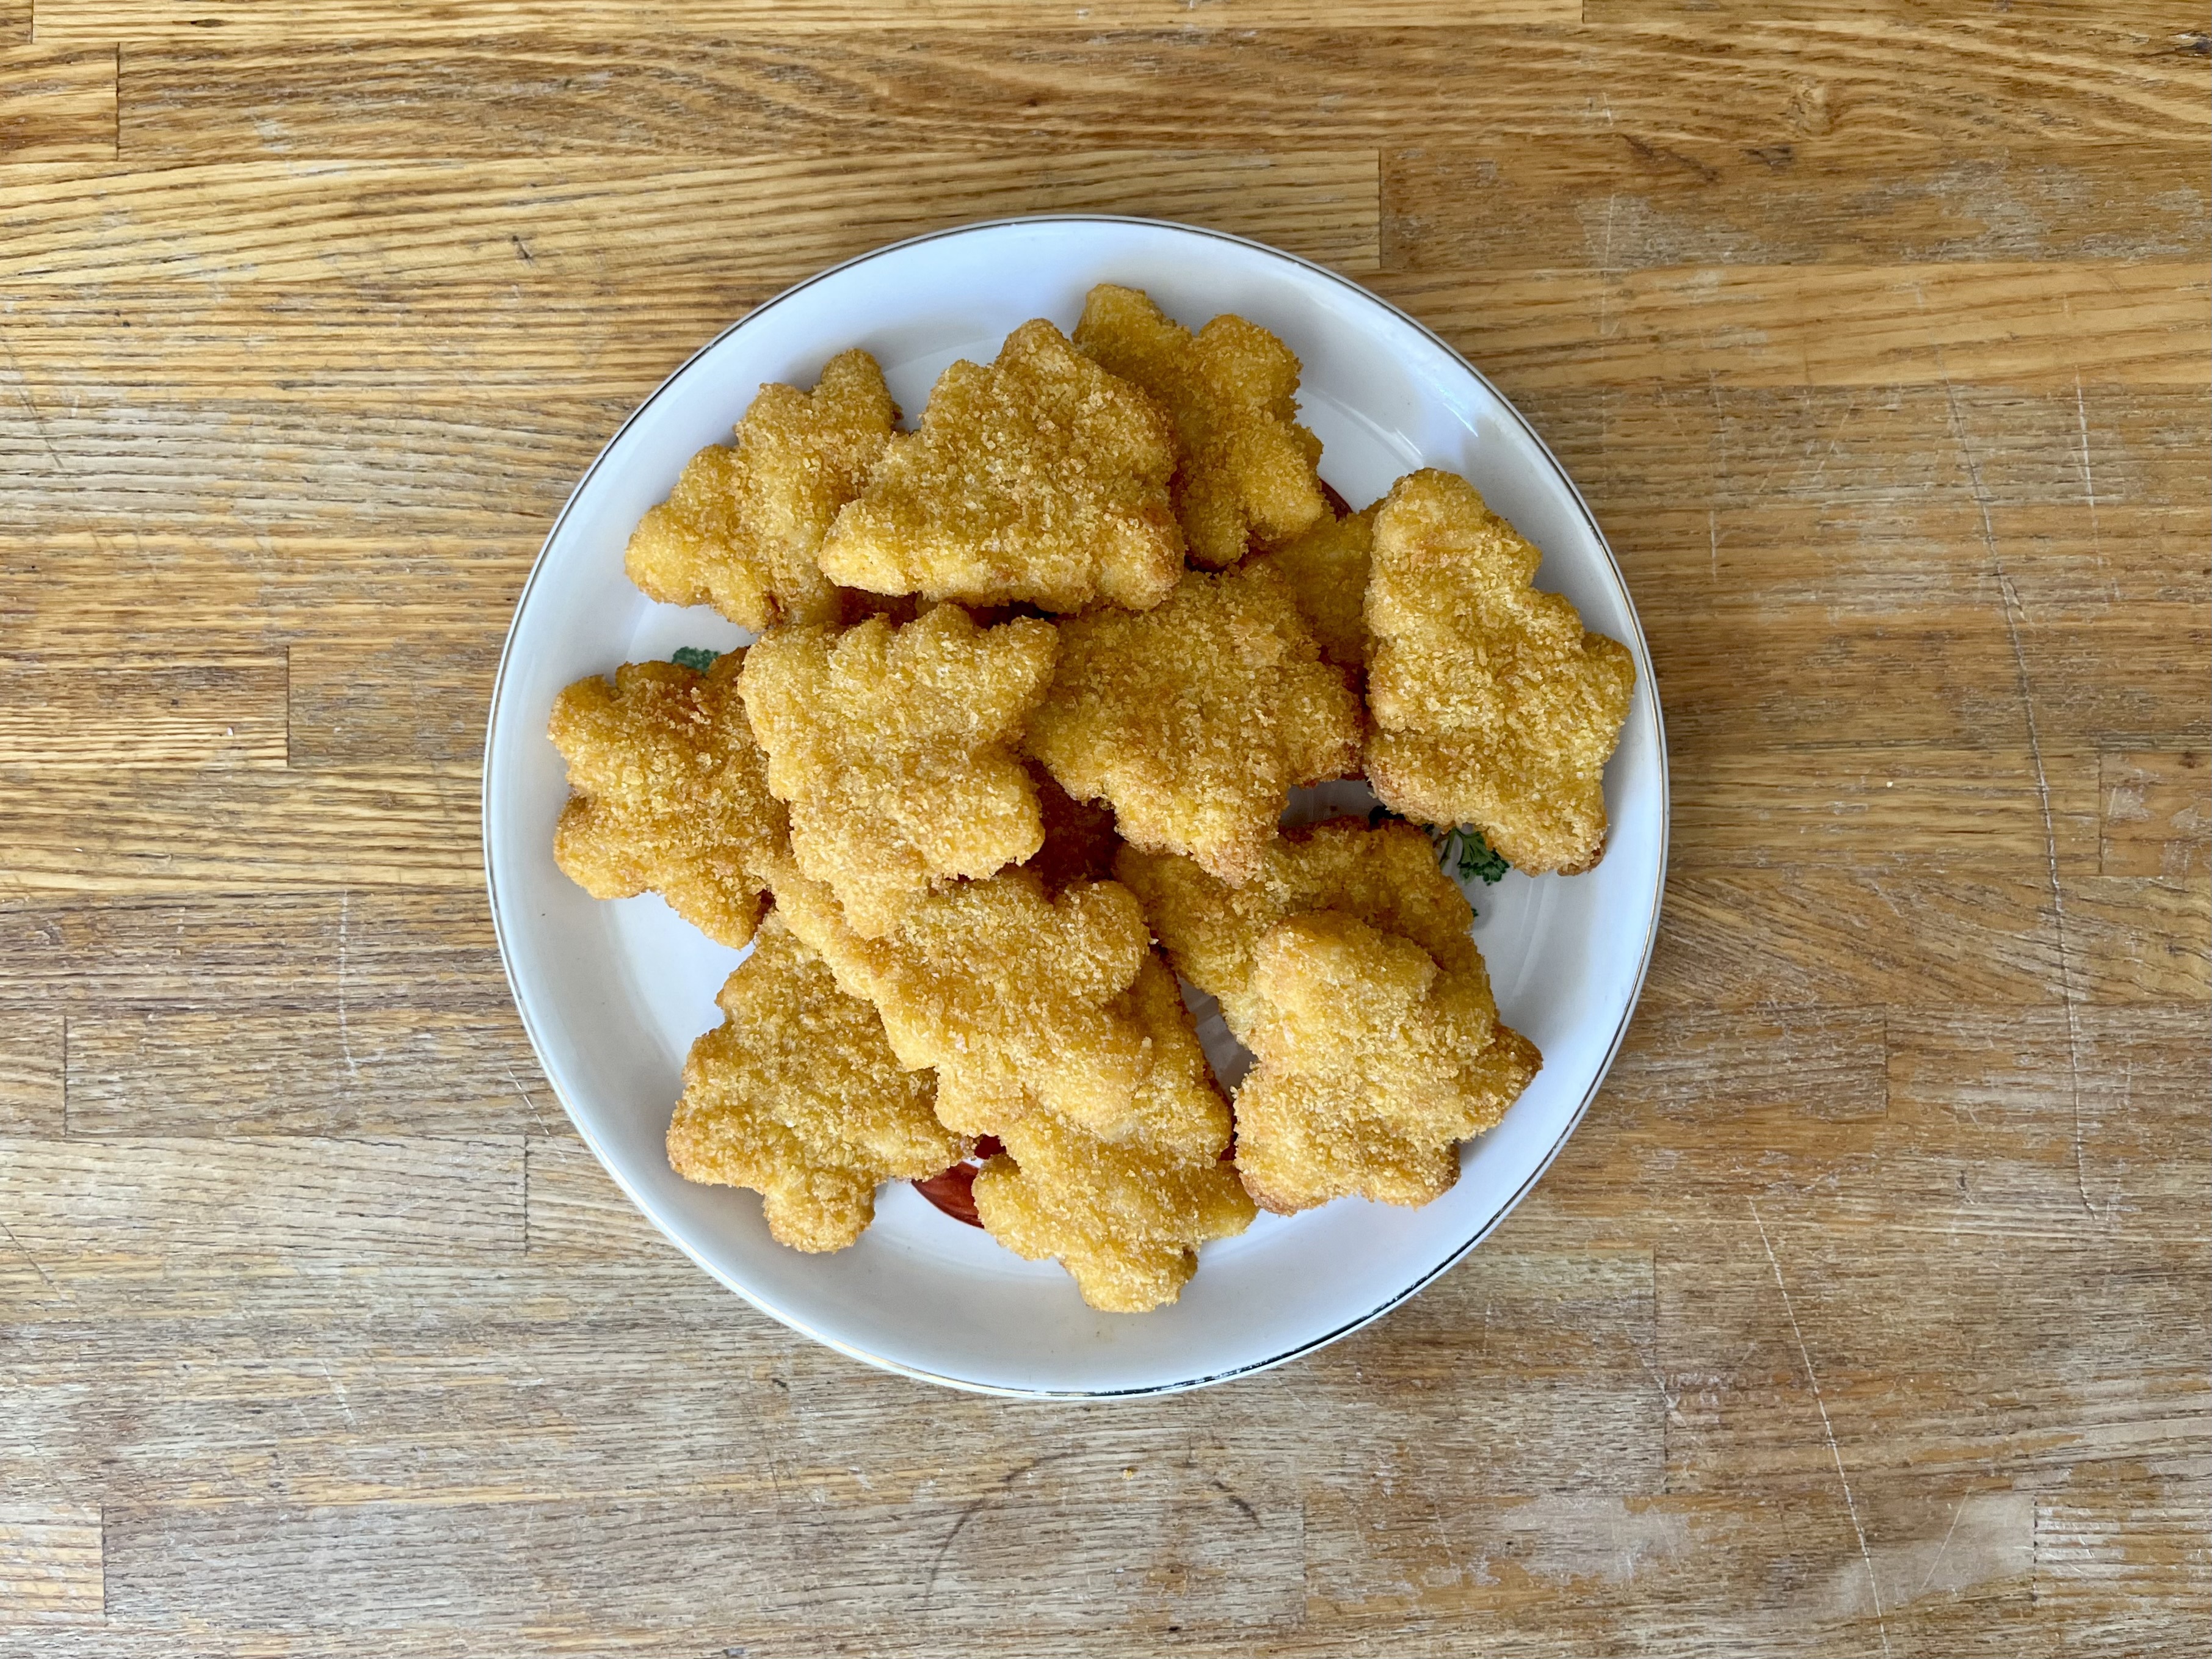 Ingham's nuggets